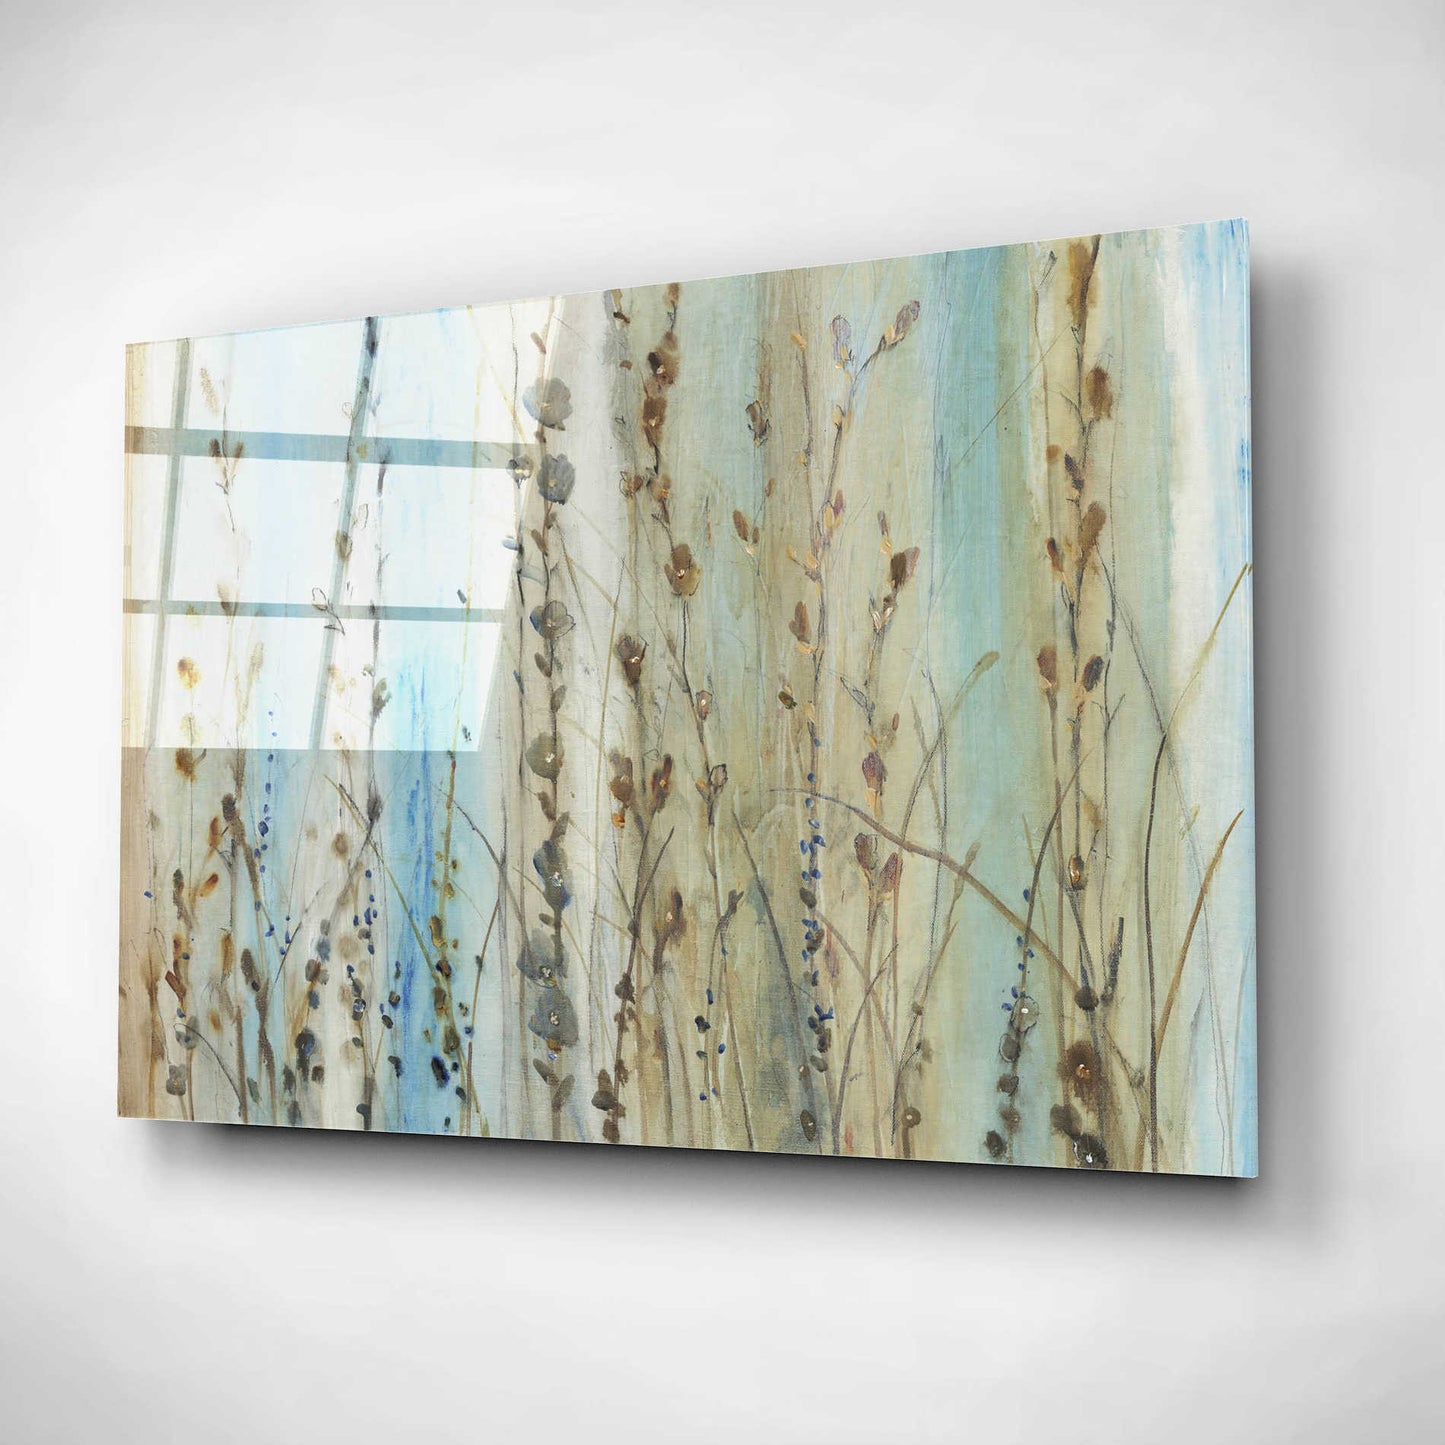 Epic Art 'Ombre Floral I' by Tim O'Toole, Acrylic Glass Wall Art,16x12